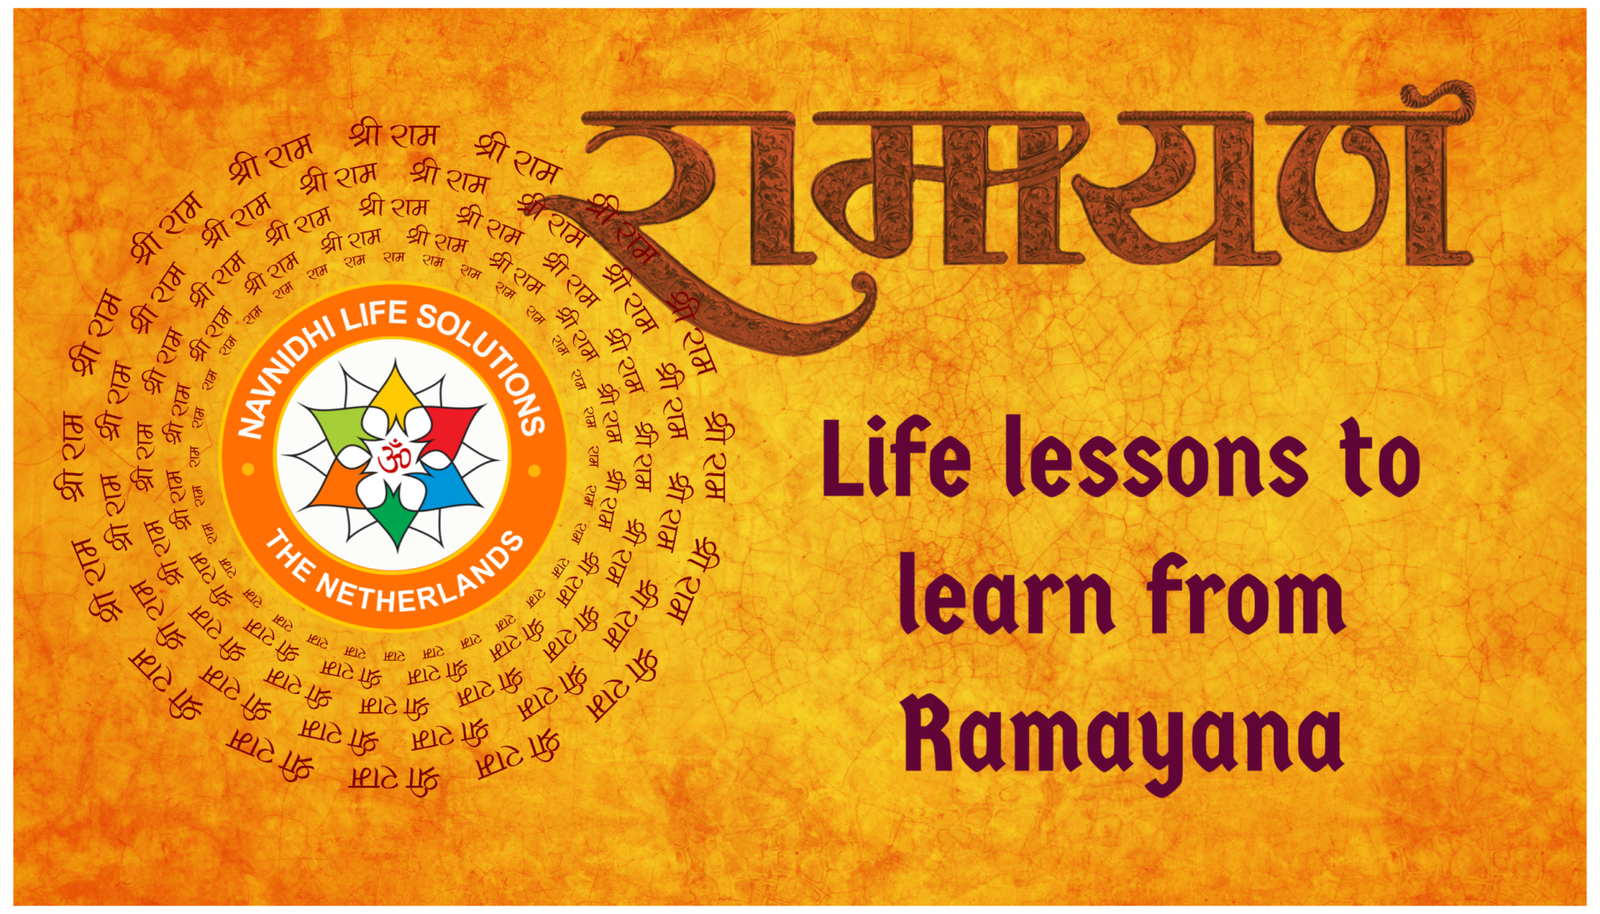 12 amazing life lessons from Ramayana for successful life